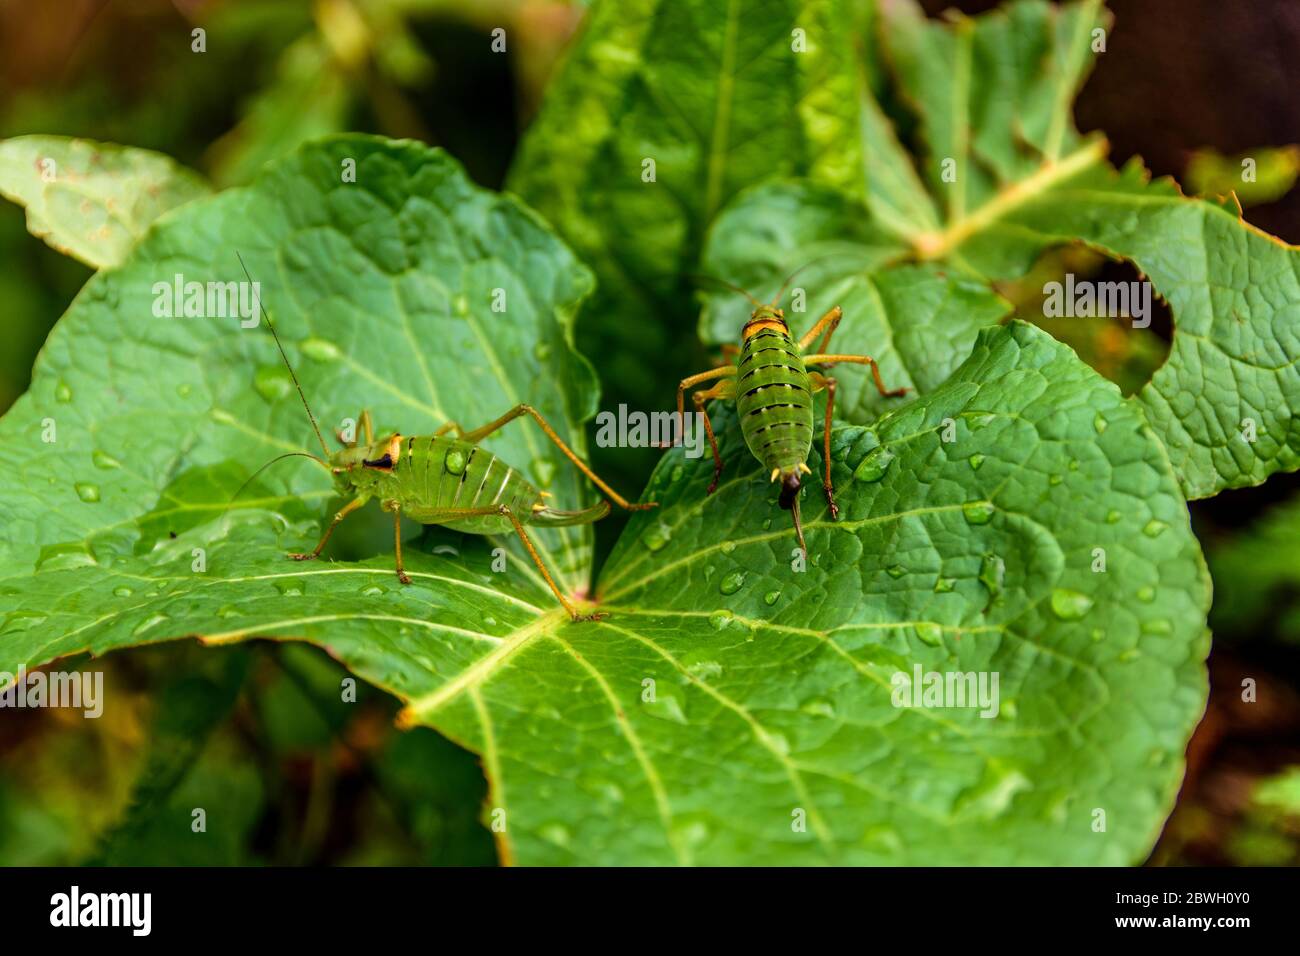 Two green and orange insects on leaves in Fagaras mountains, Romania Stock Photo